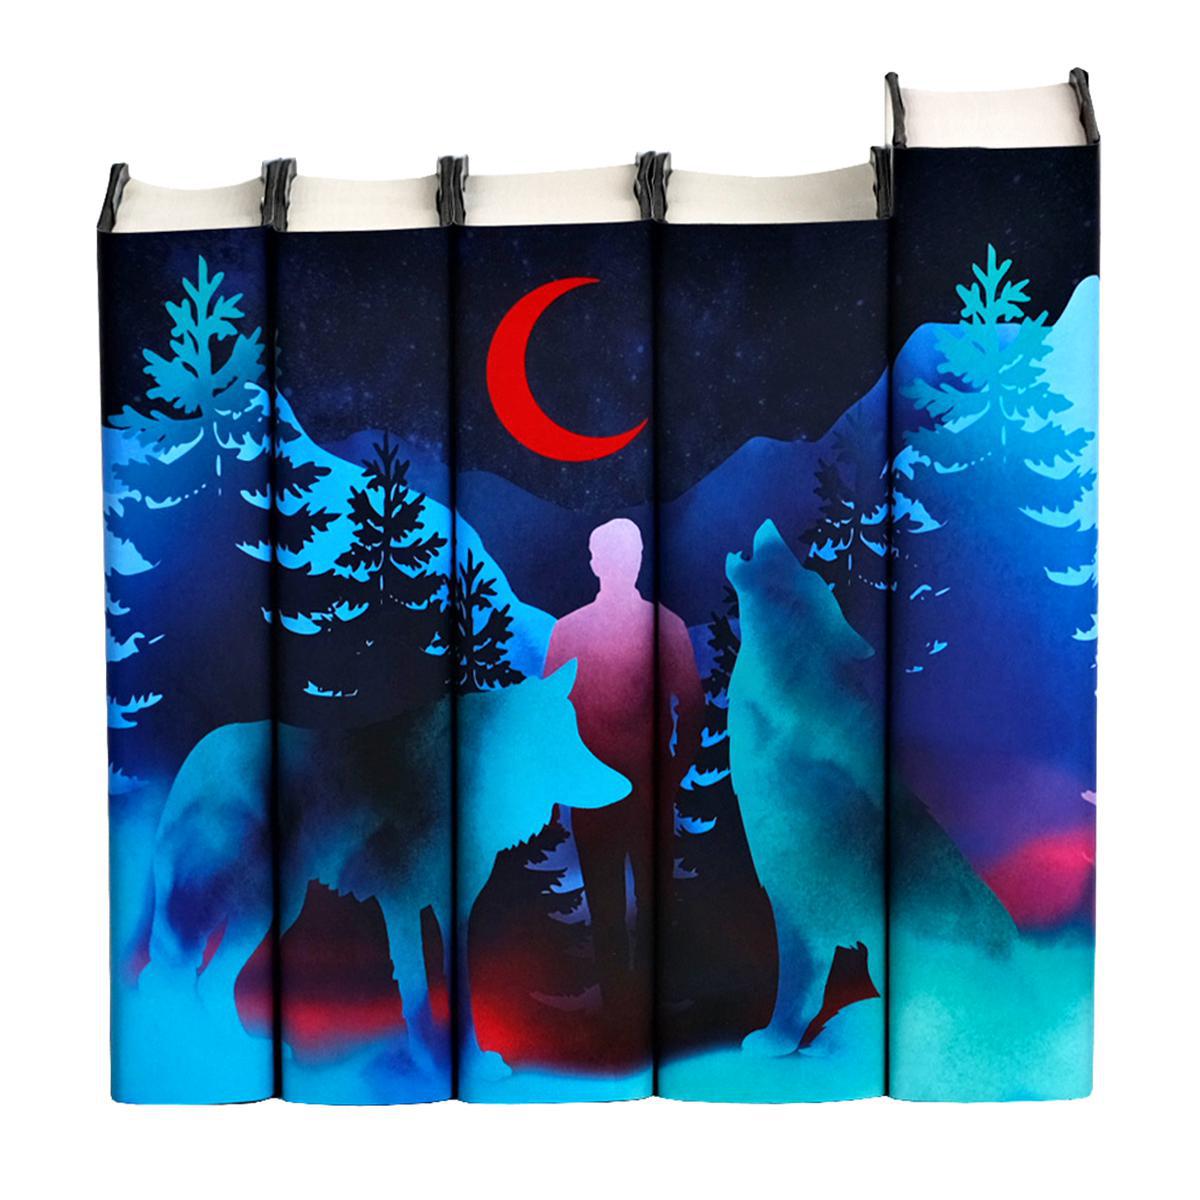 Customized Twilight Red Moon Set - Jackets Only